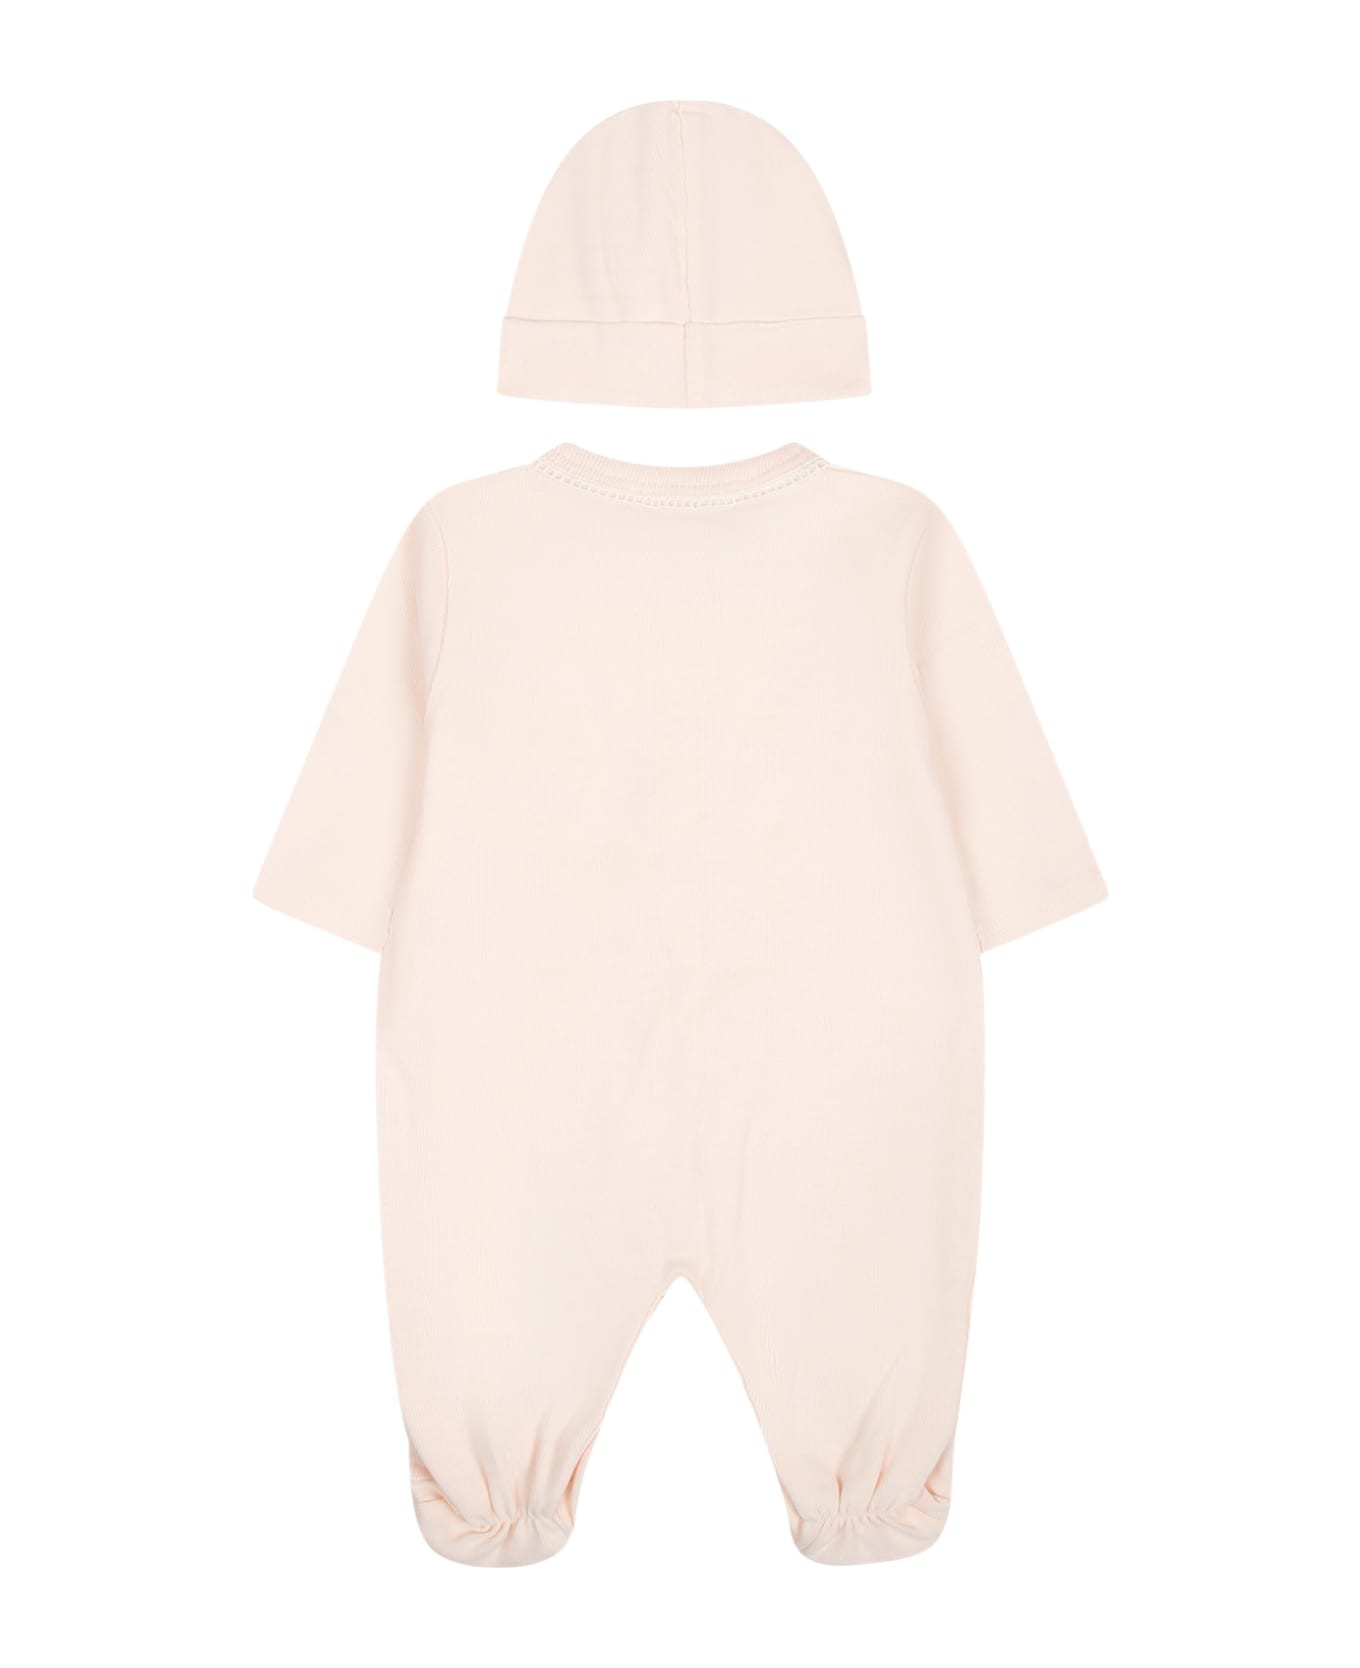 Chloé Pink Set For Baby Girl With Logo - Salmone